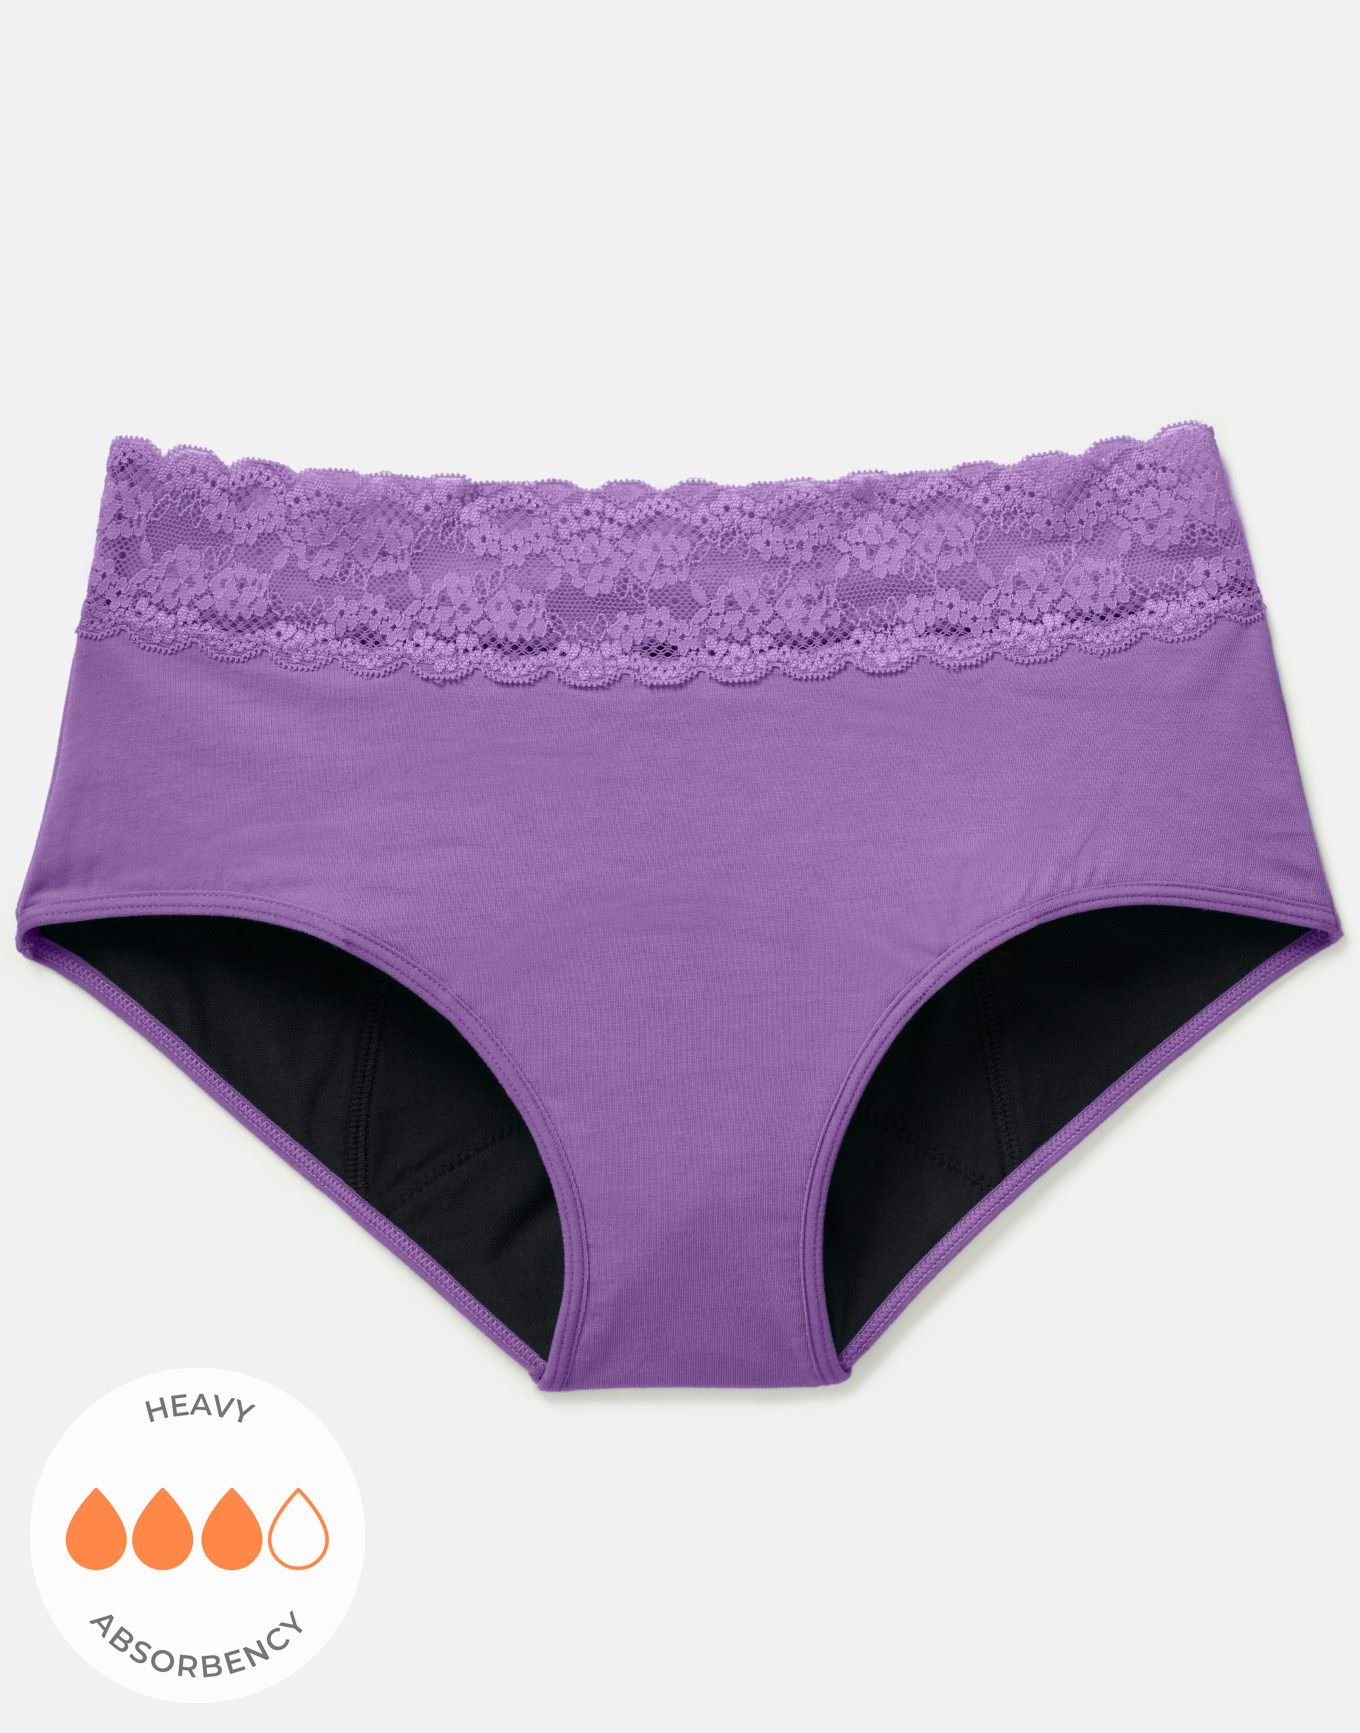 Should women be worried about their underwear getting discoloured